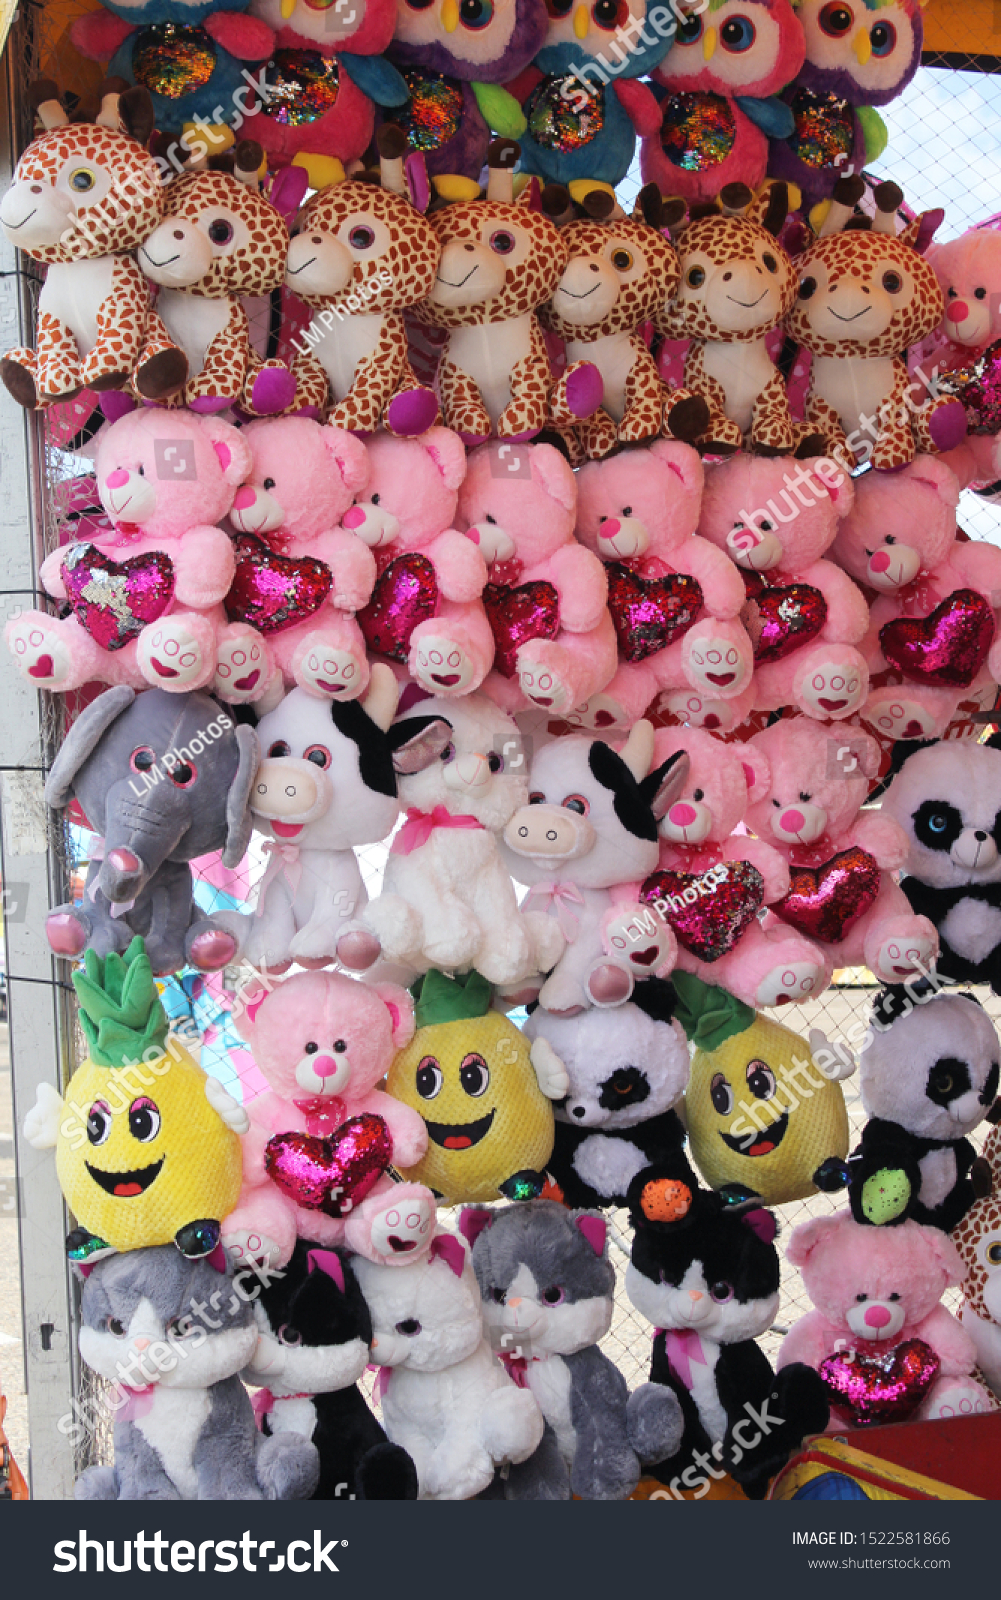 Stuffed Animals prizes at rural carnival #1522581866